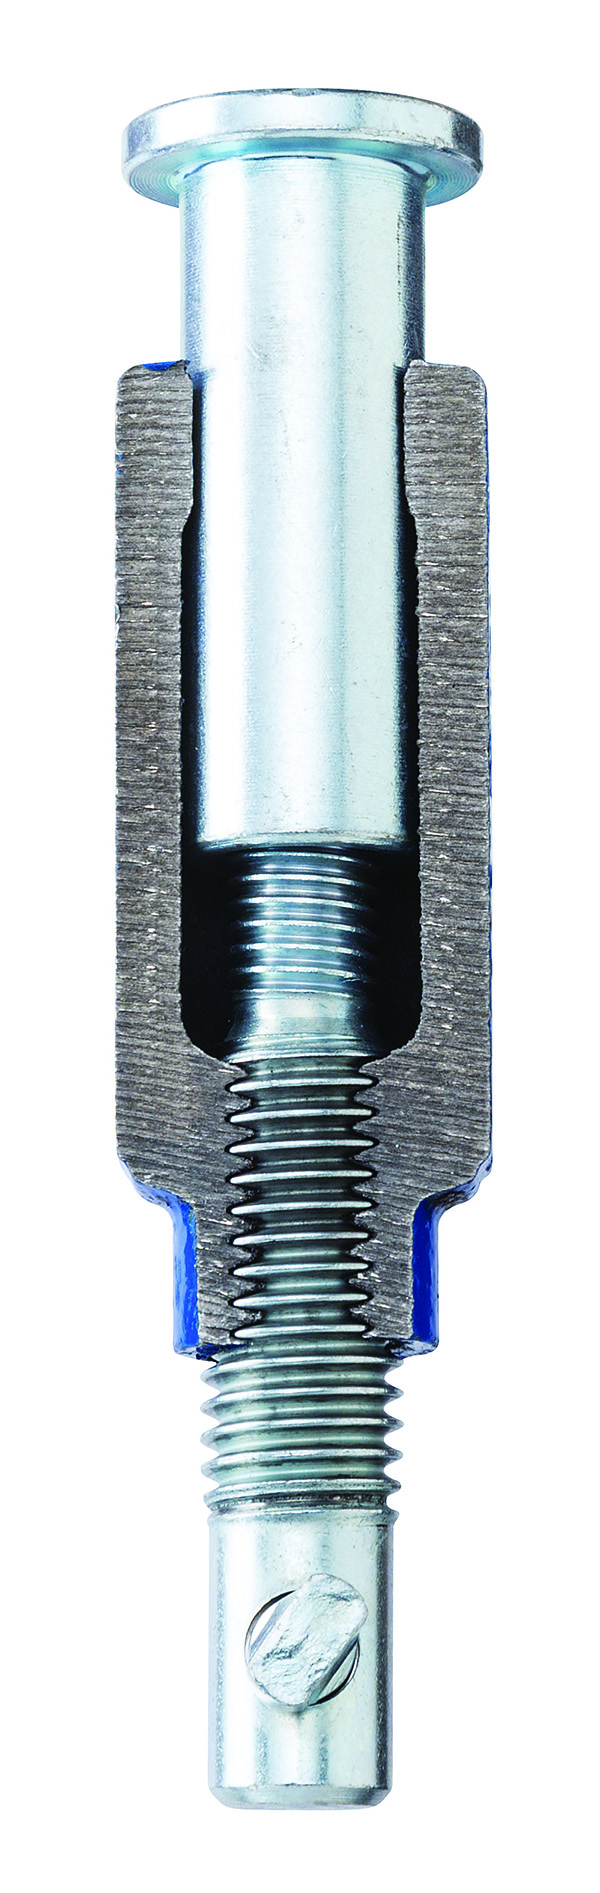 The double threads provide faster clamp head advancement and tightening, and the enclosed design prevents glue from clogging the threads.